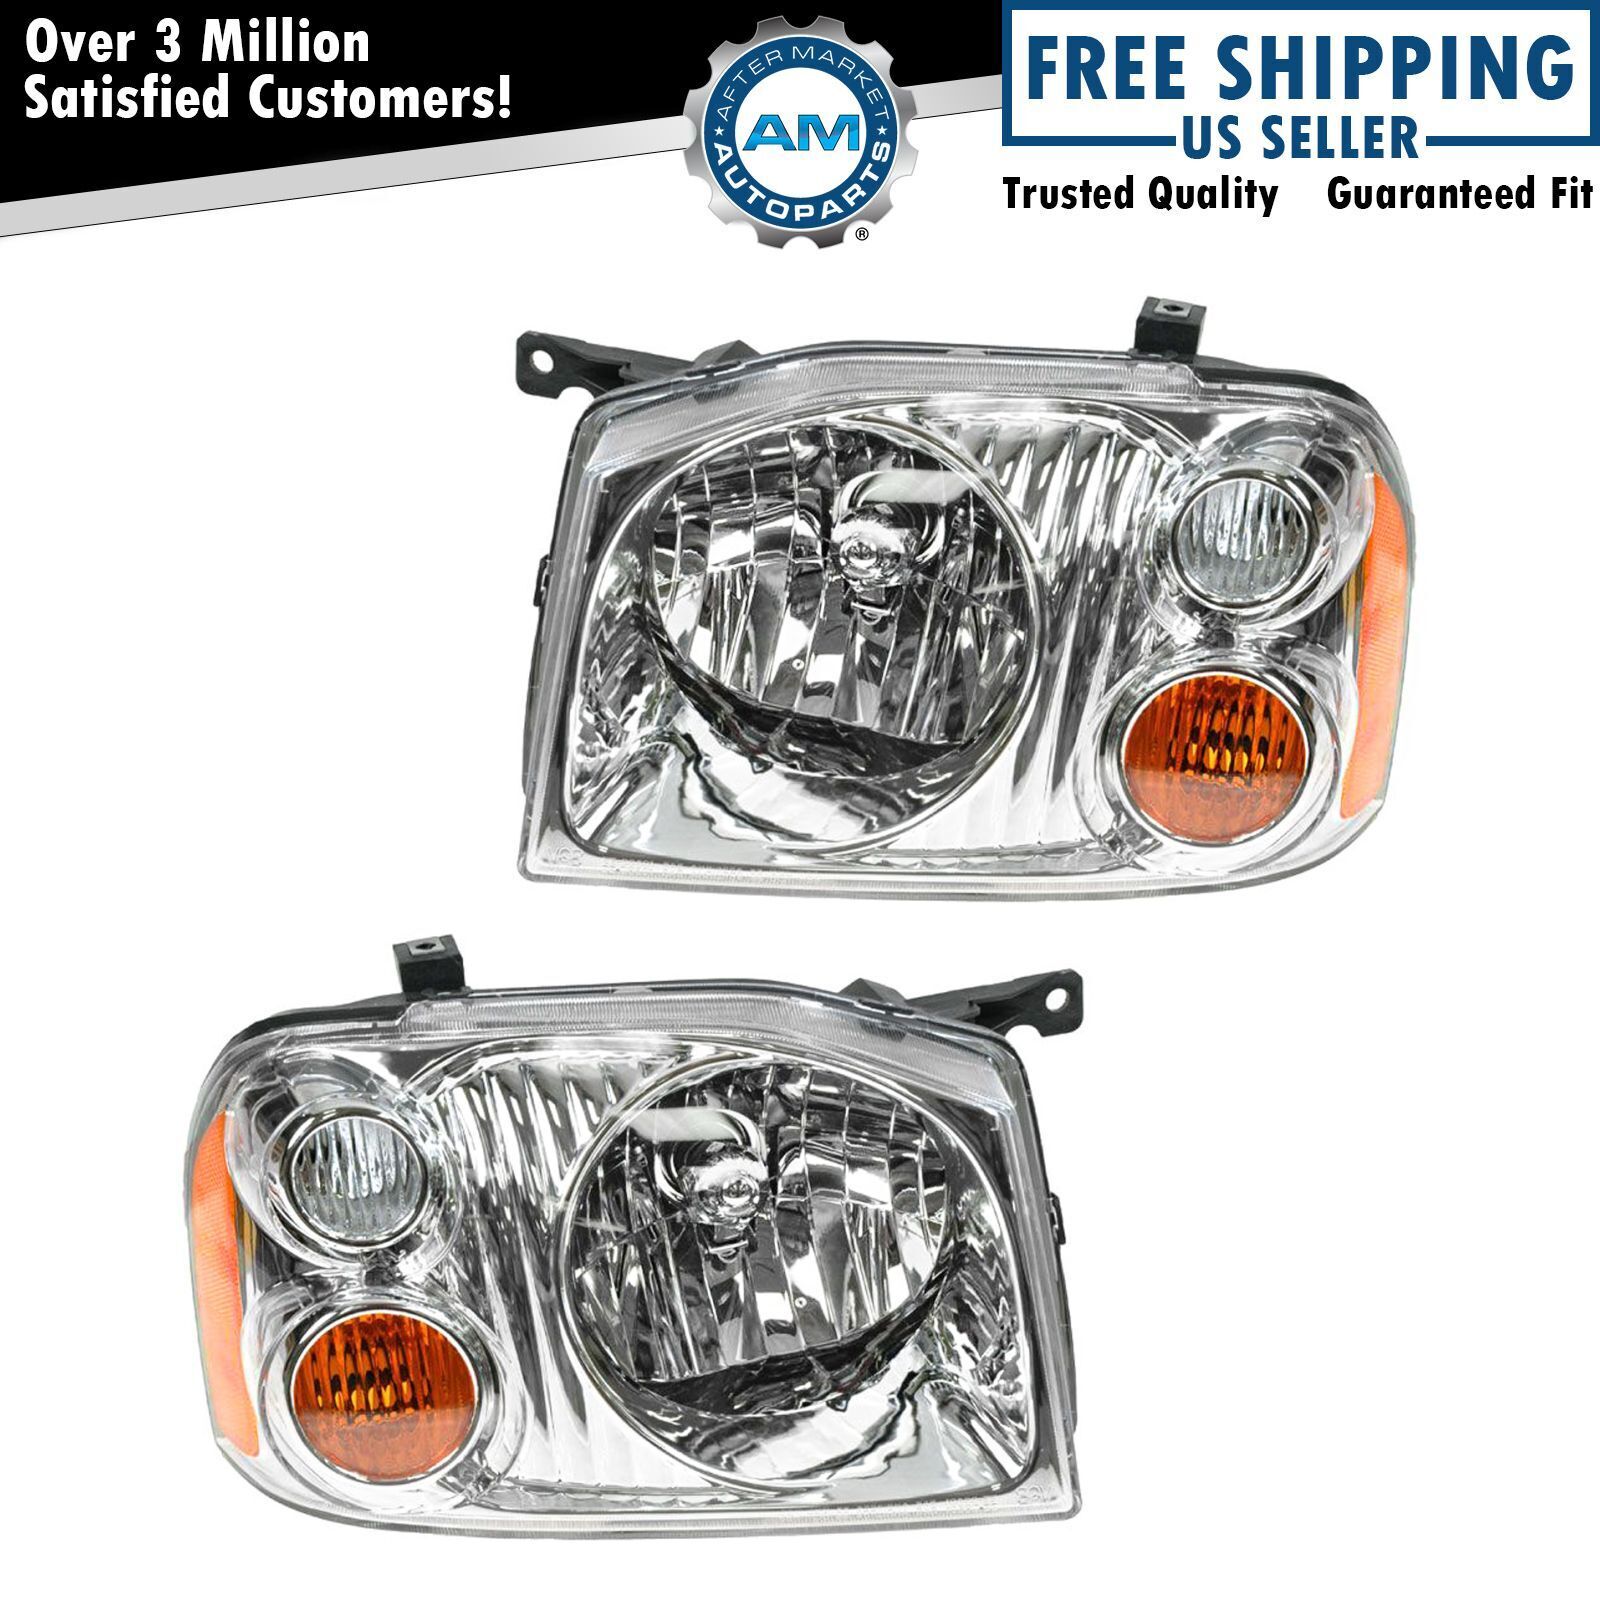 Headlights Headlamps Pair Set Left & Right for 01-04 Nissan Frontier Pickup